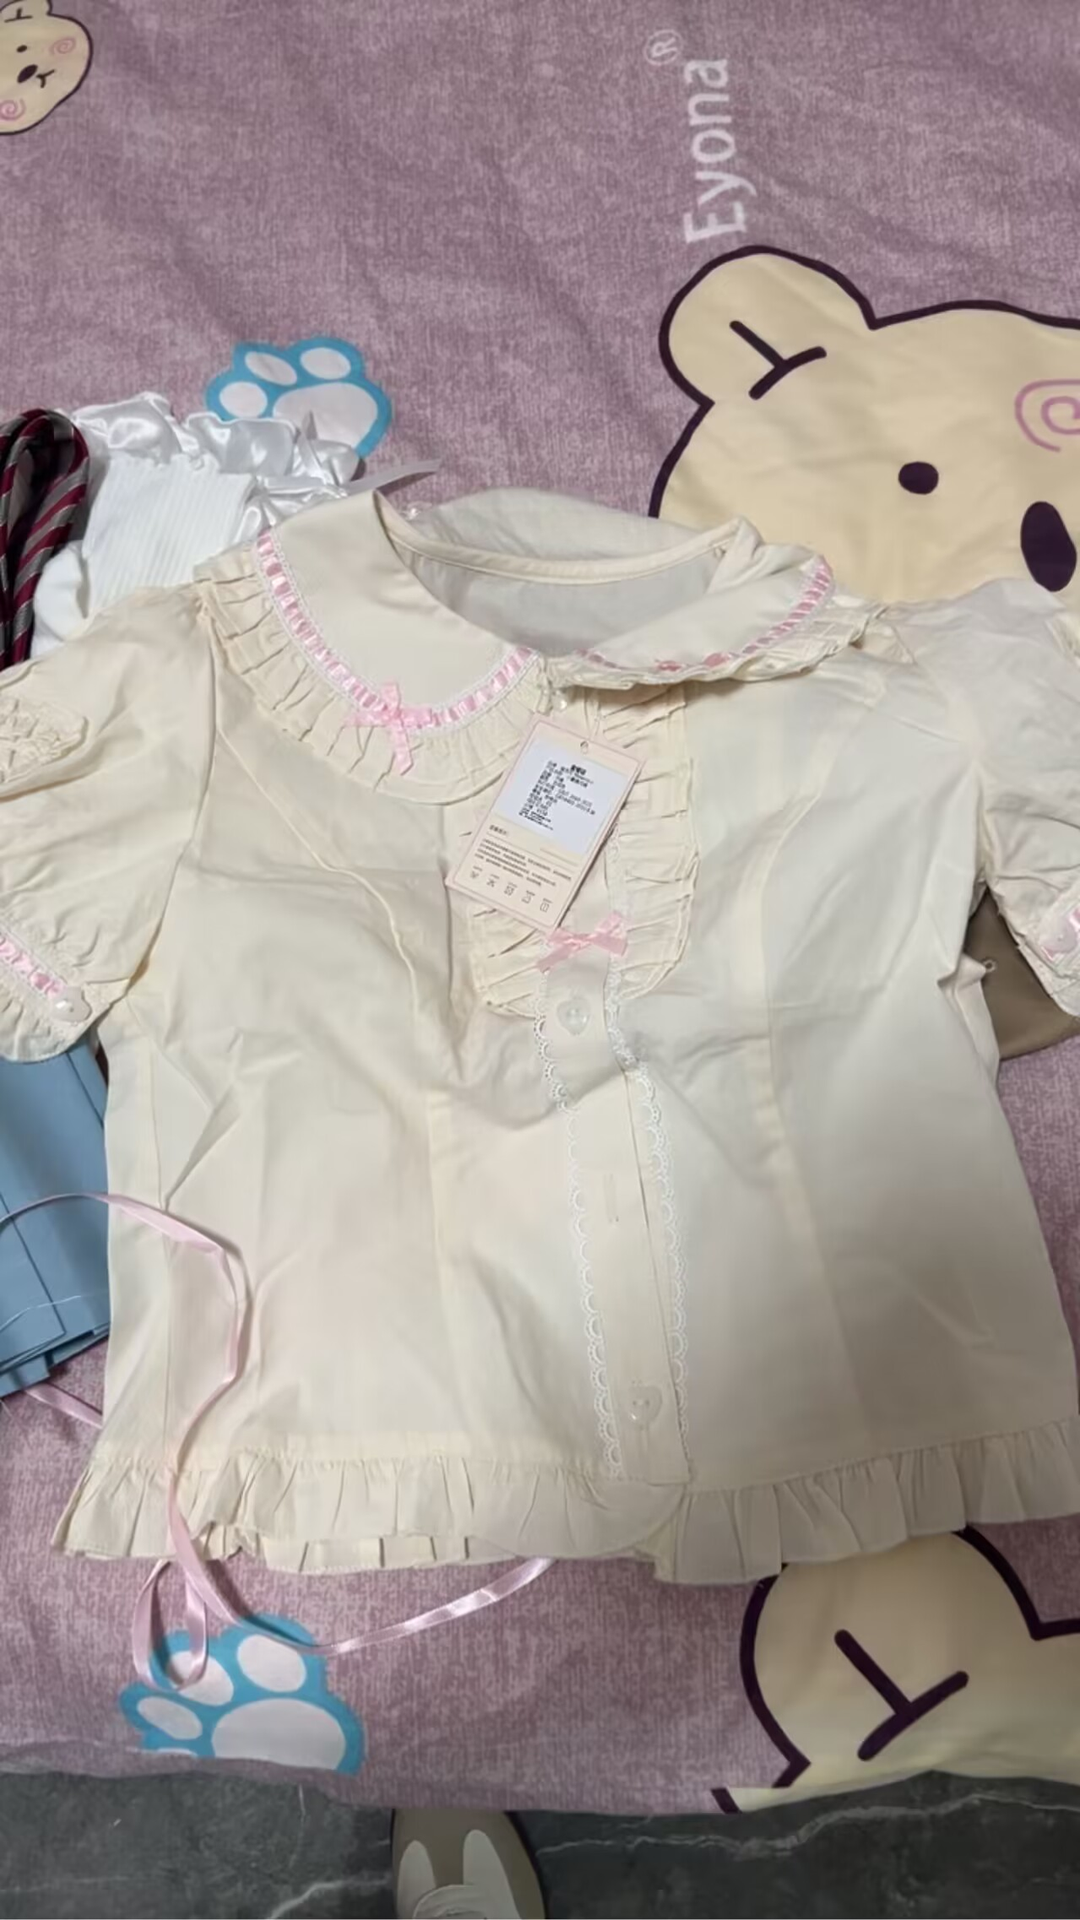 Mewroco~Little Frosty~Kawaii Lolita Summer Blouse Multicolors S ivory x pink shirt( 100% cotton cloth) 